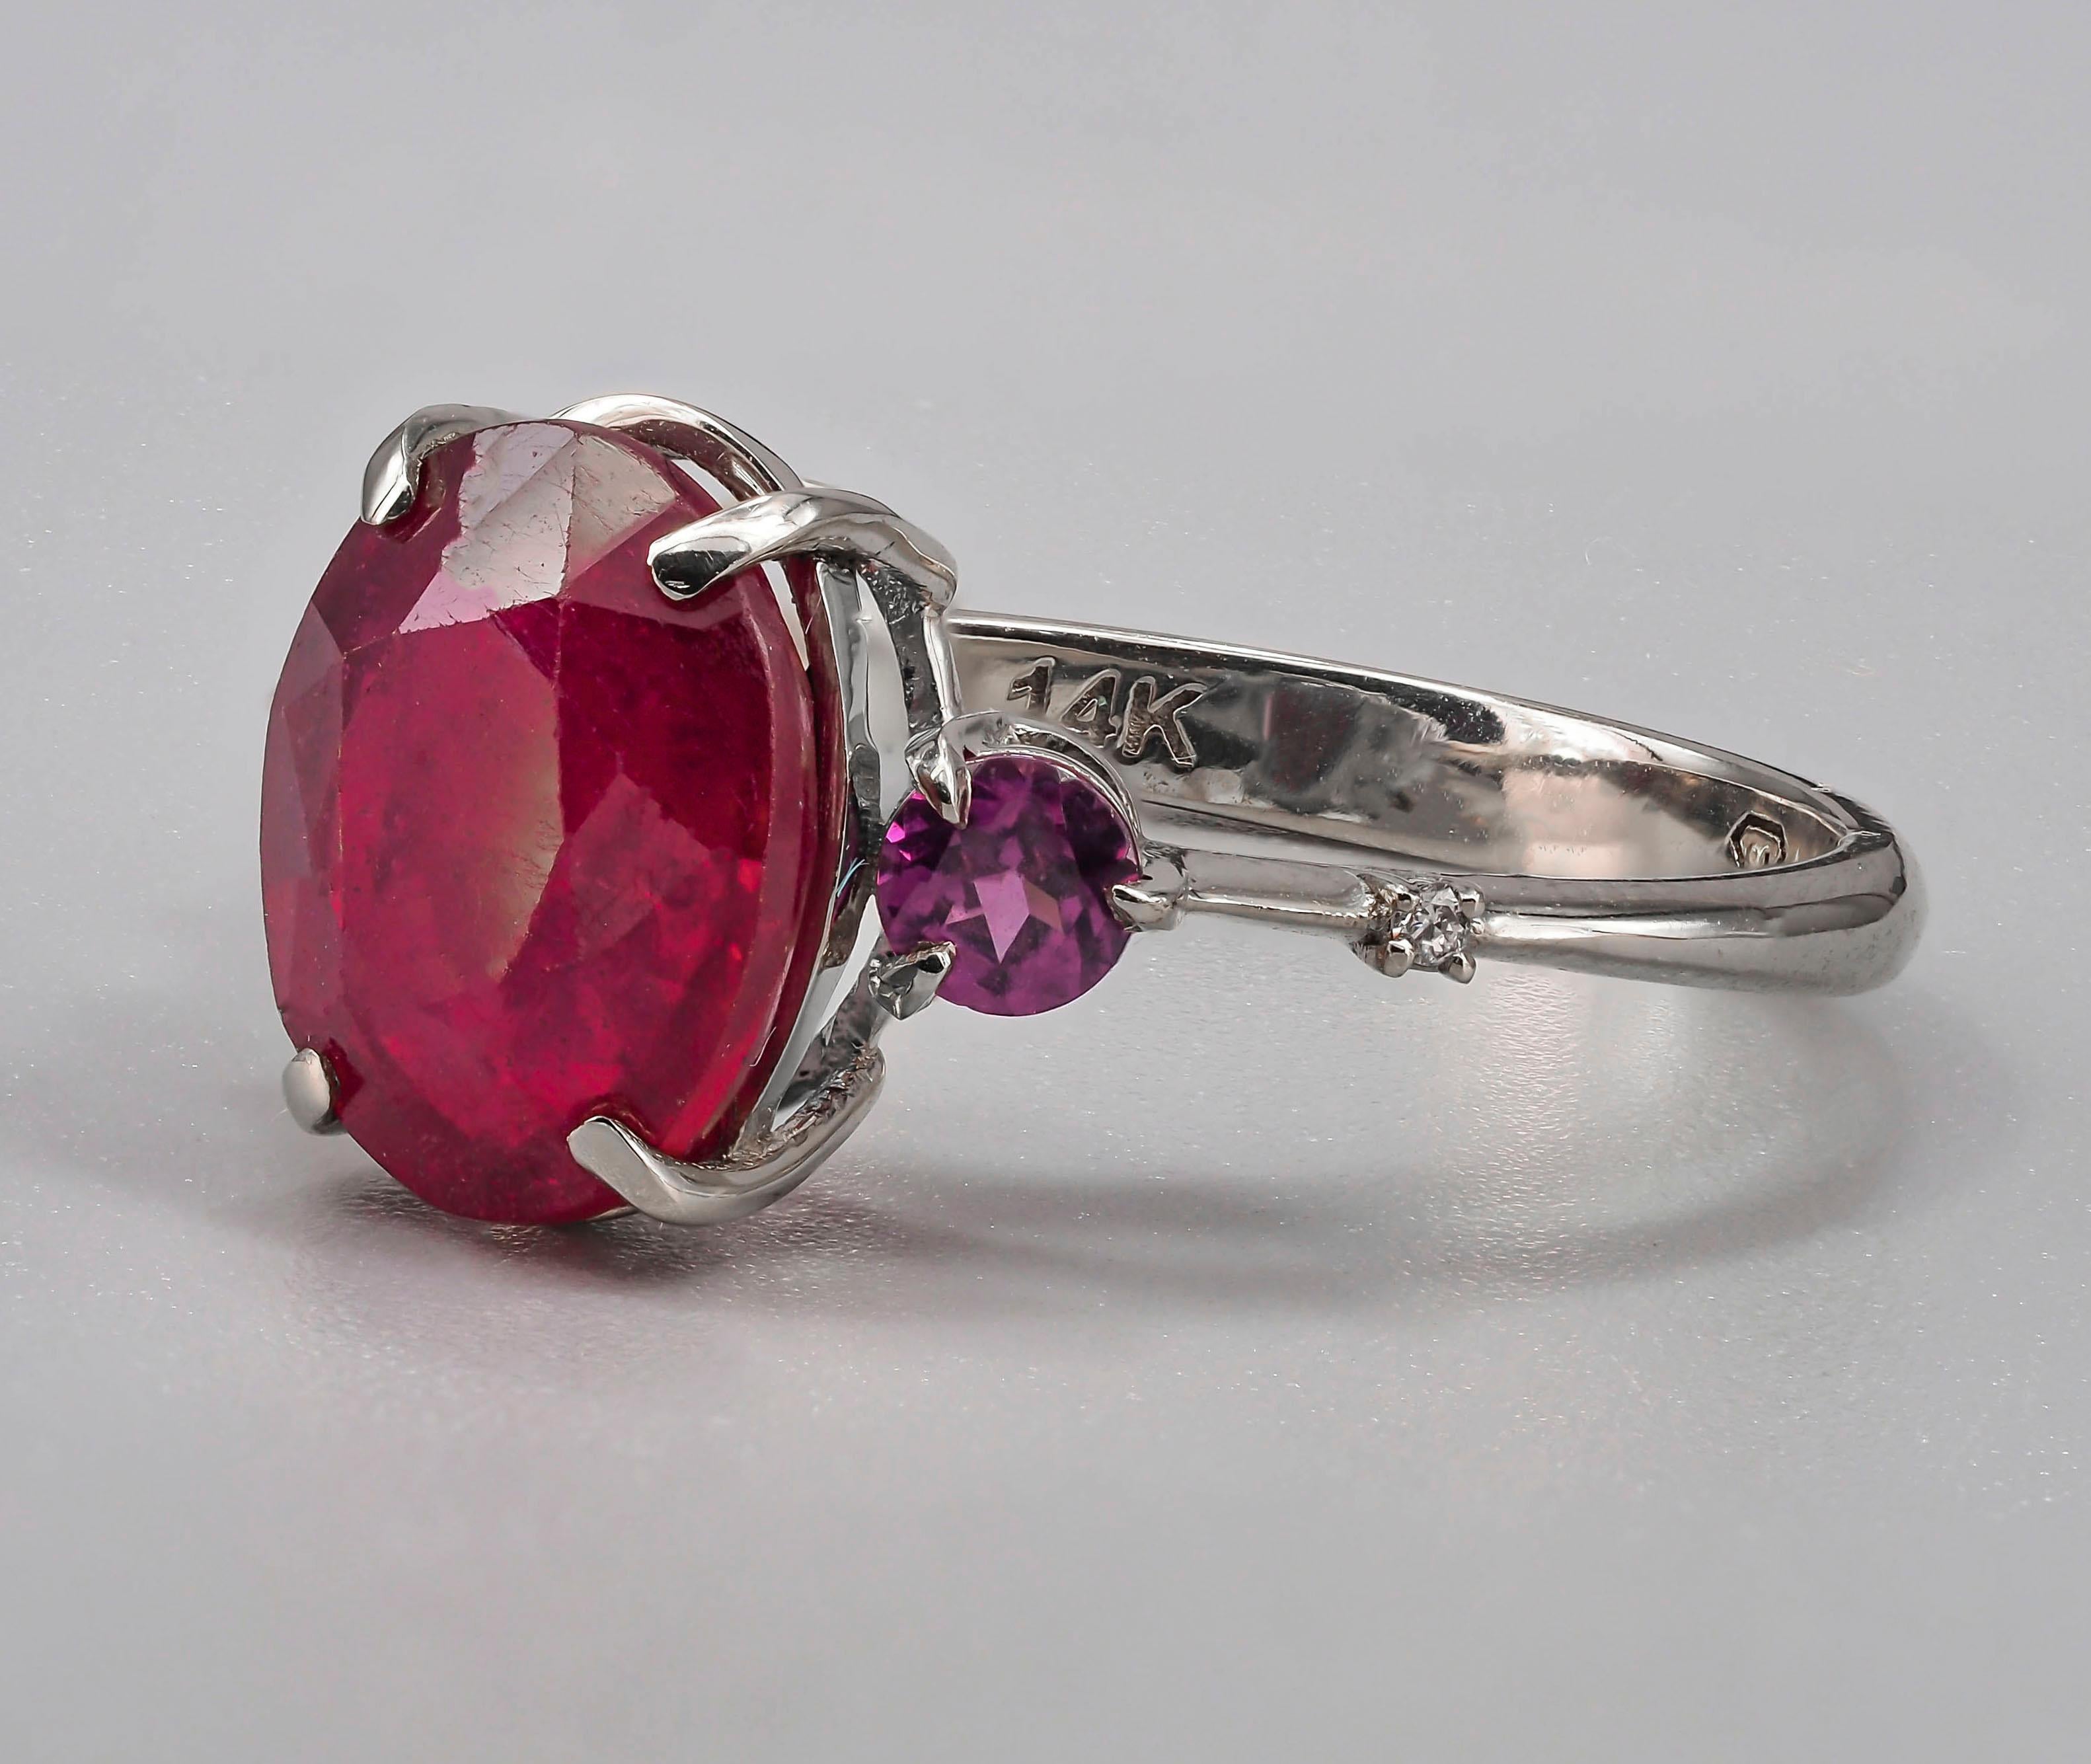 For Sale:  Ruby ring in 14k gold. Oval ruby ring. Solitaire ring with ruby.  7